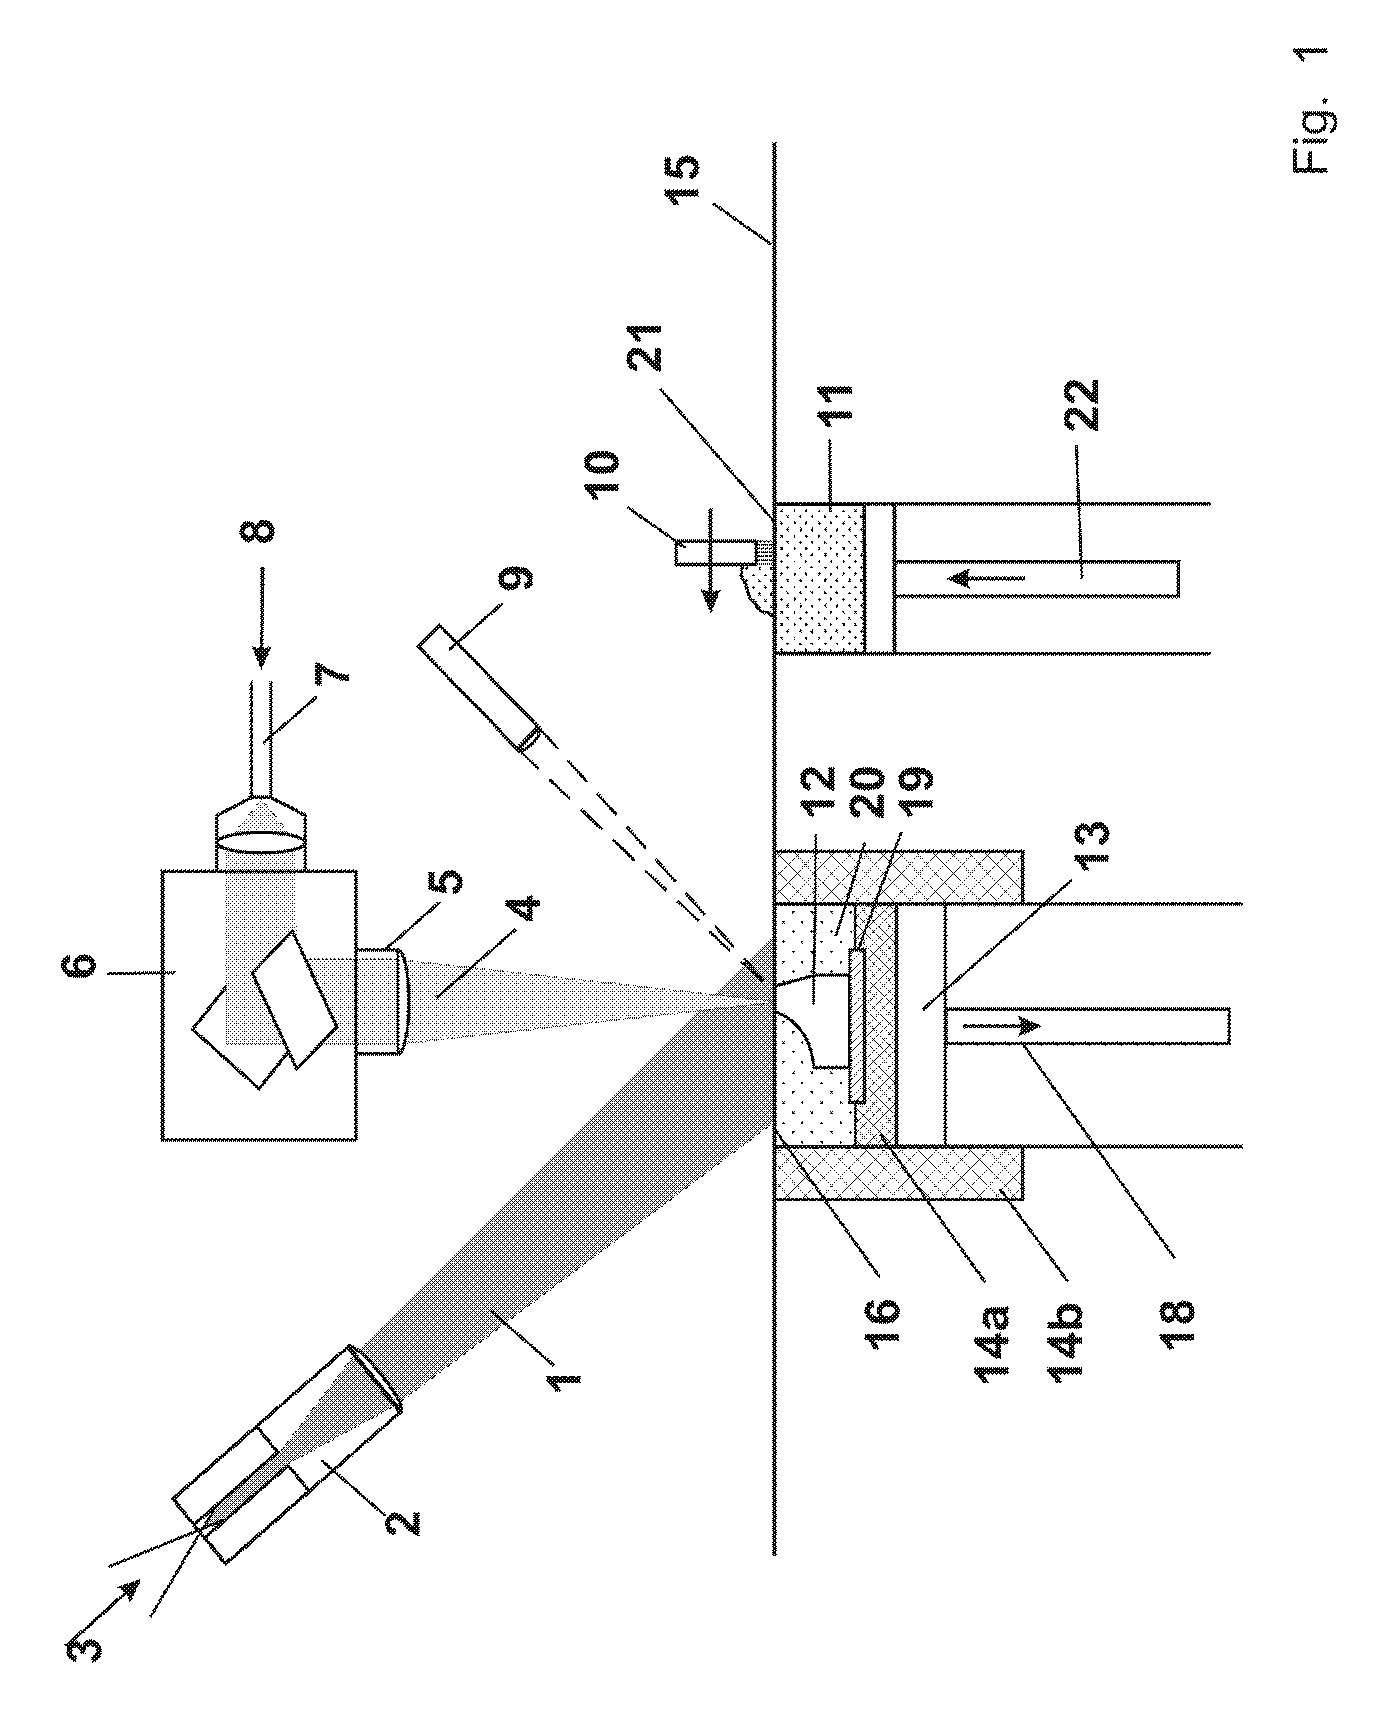 Ceramic or glass-ceramic article and methods for producing such article